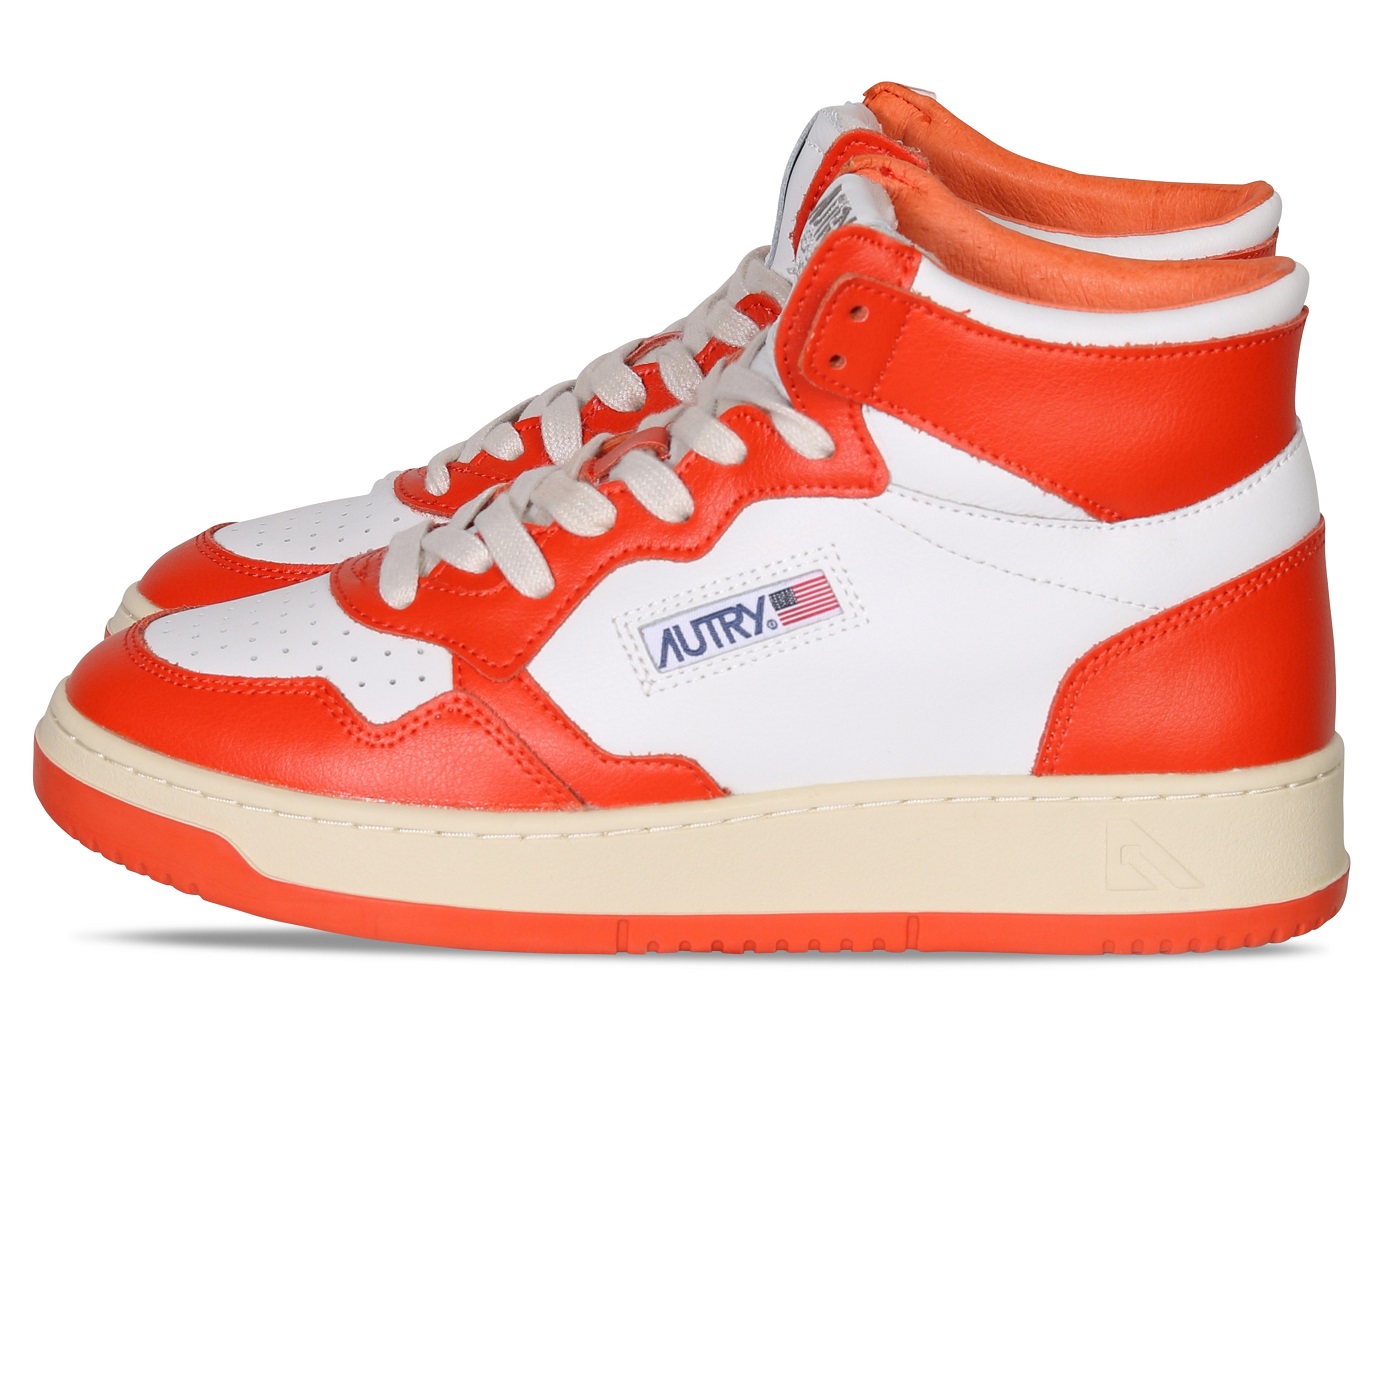 AUTRY ACTION SHOES Mid Sneaker White/Tangerine